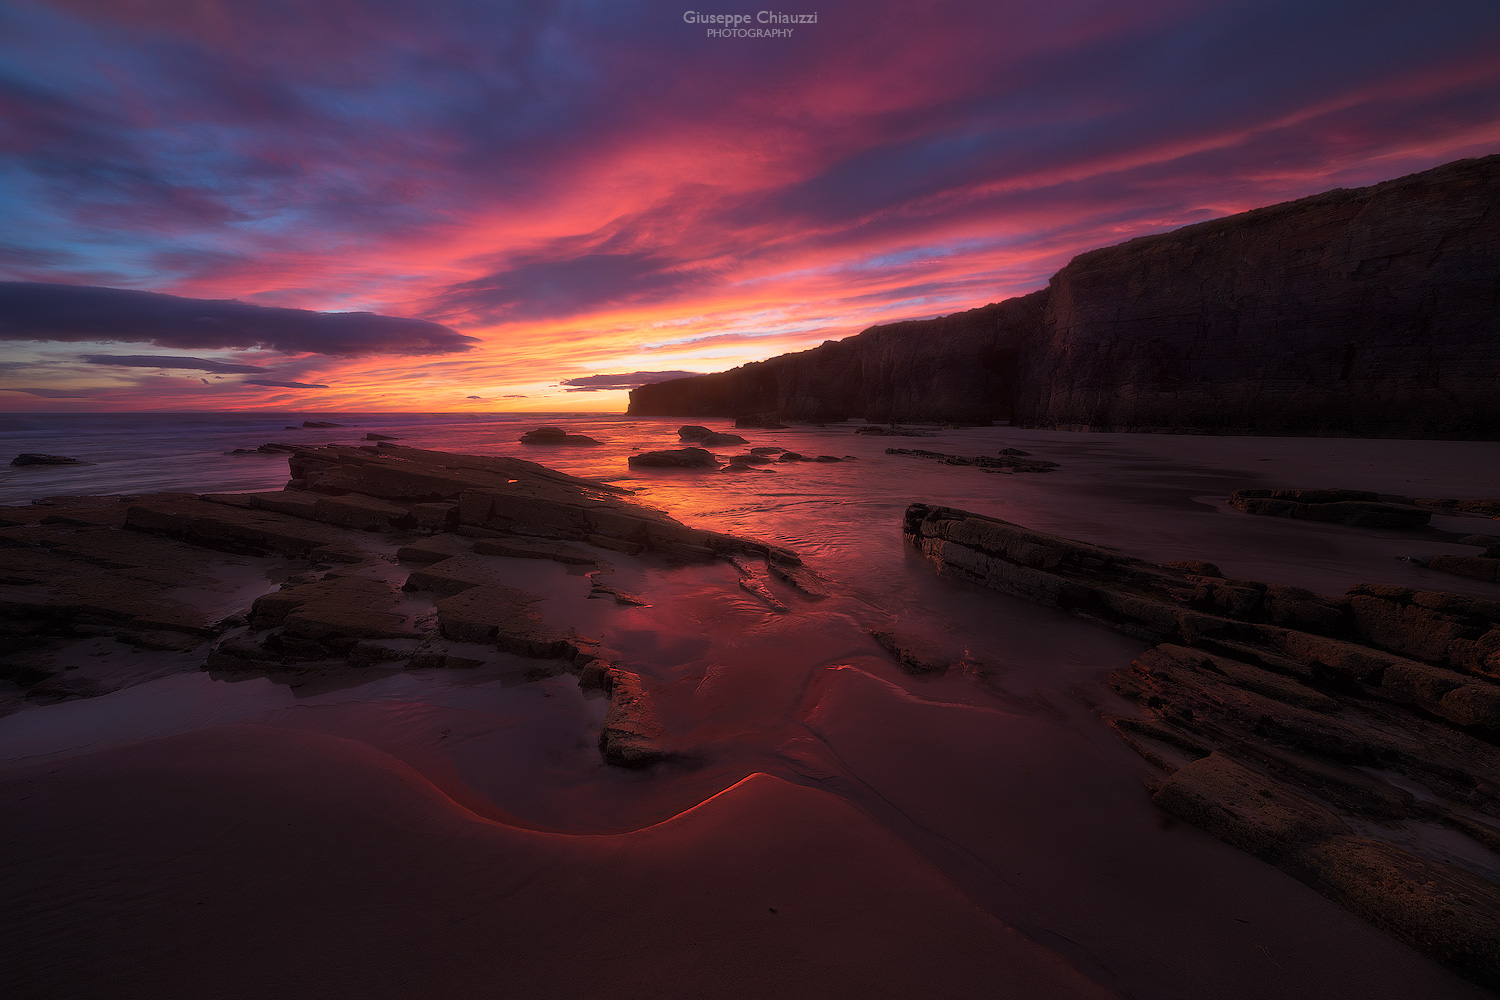 When the first light warms the catedrales